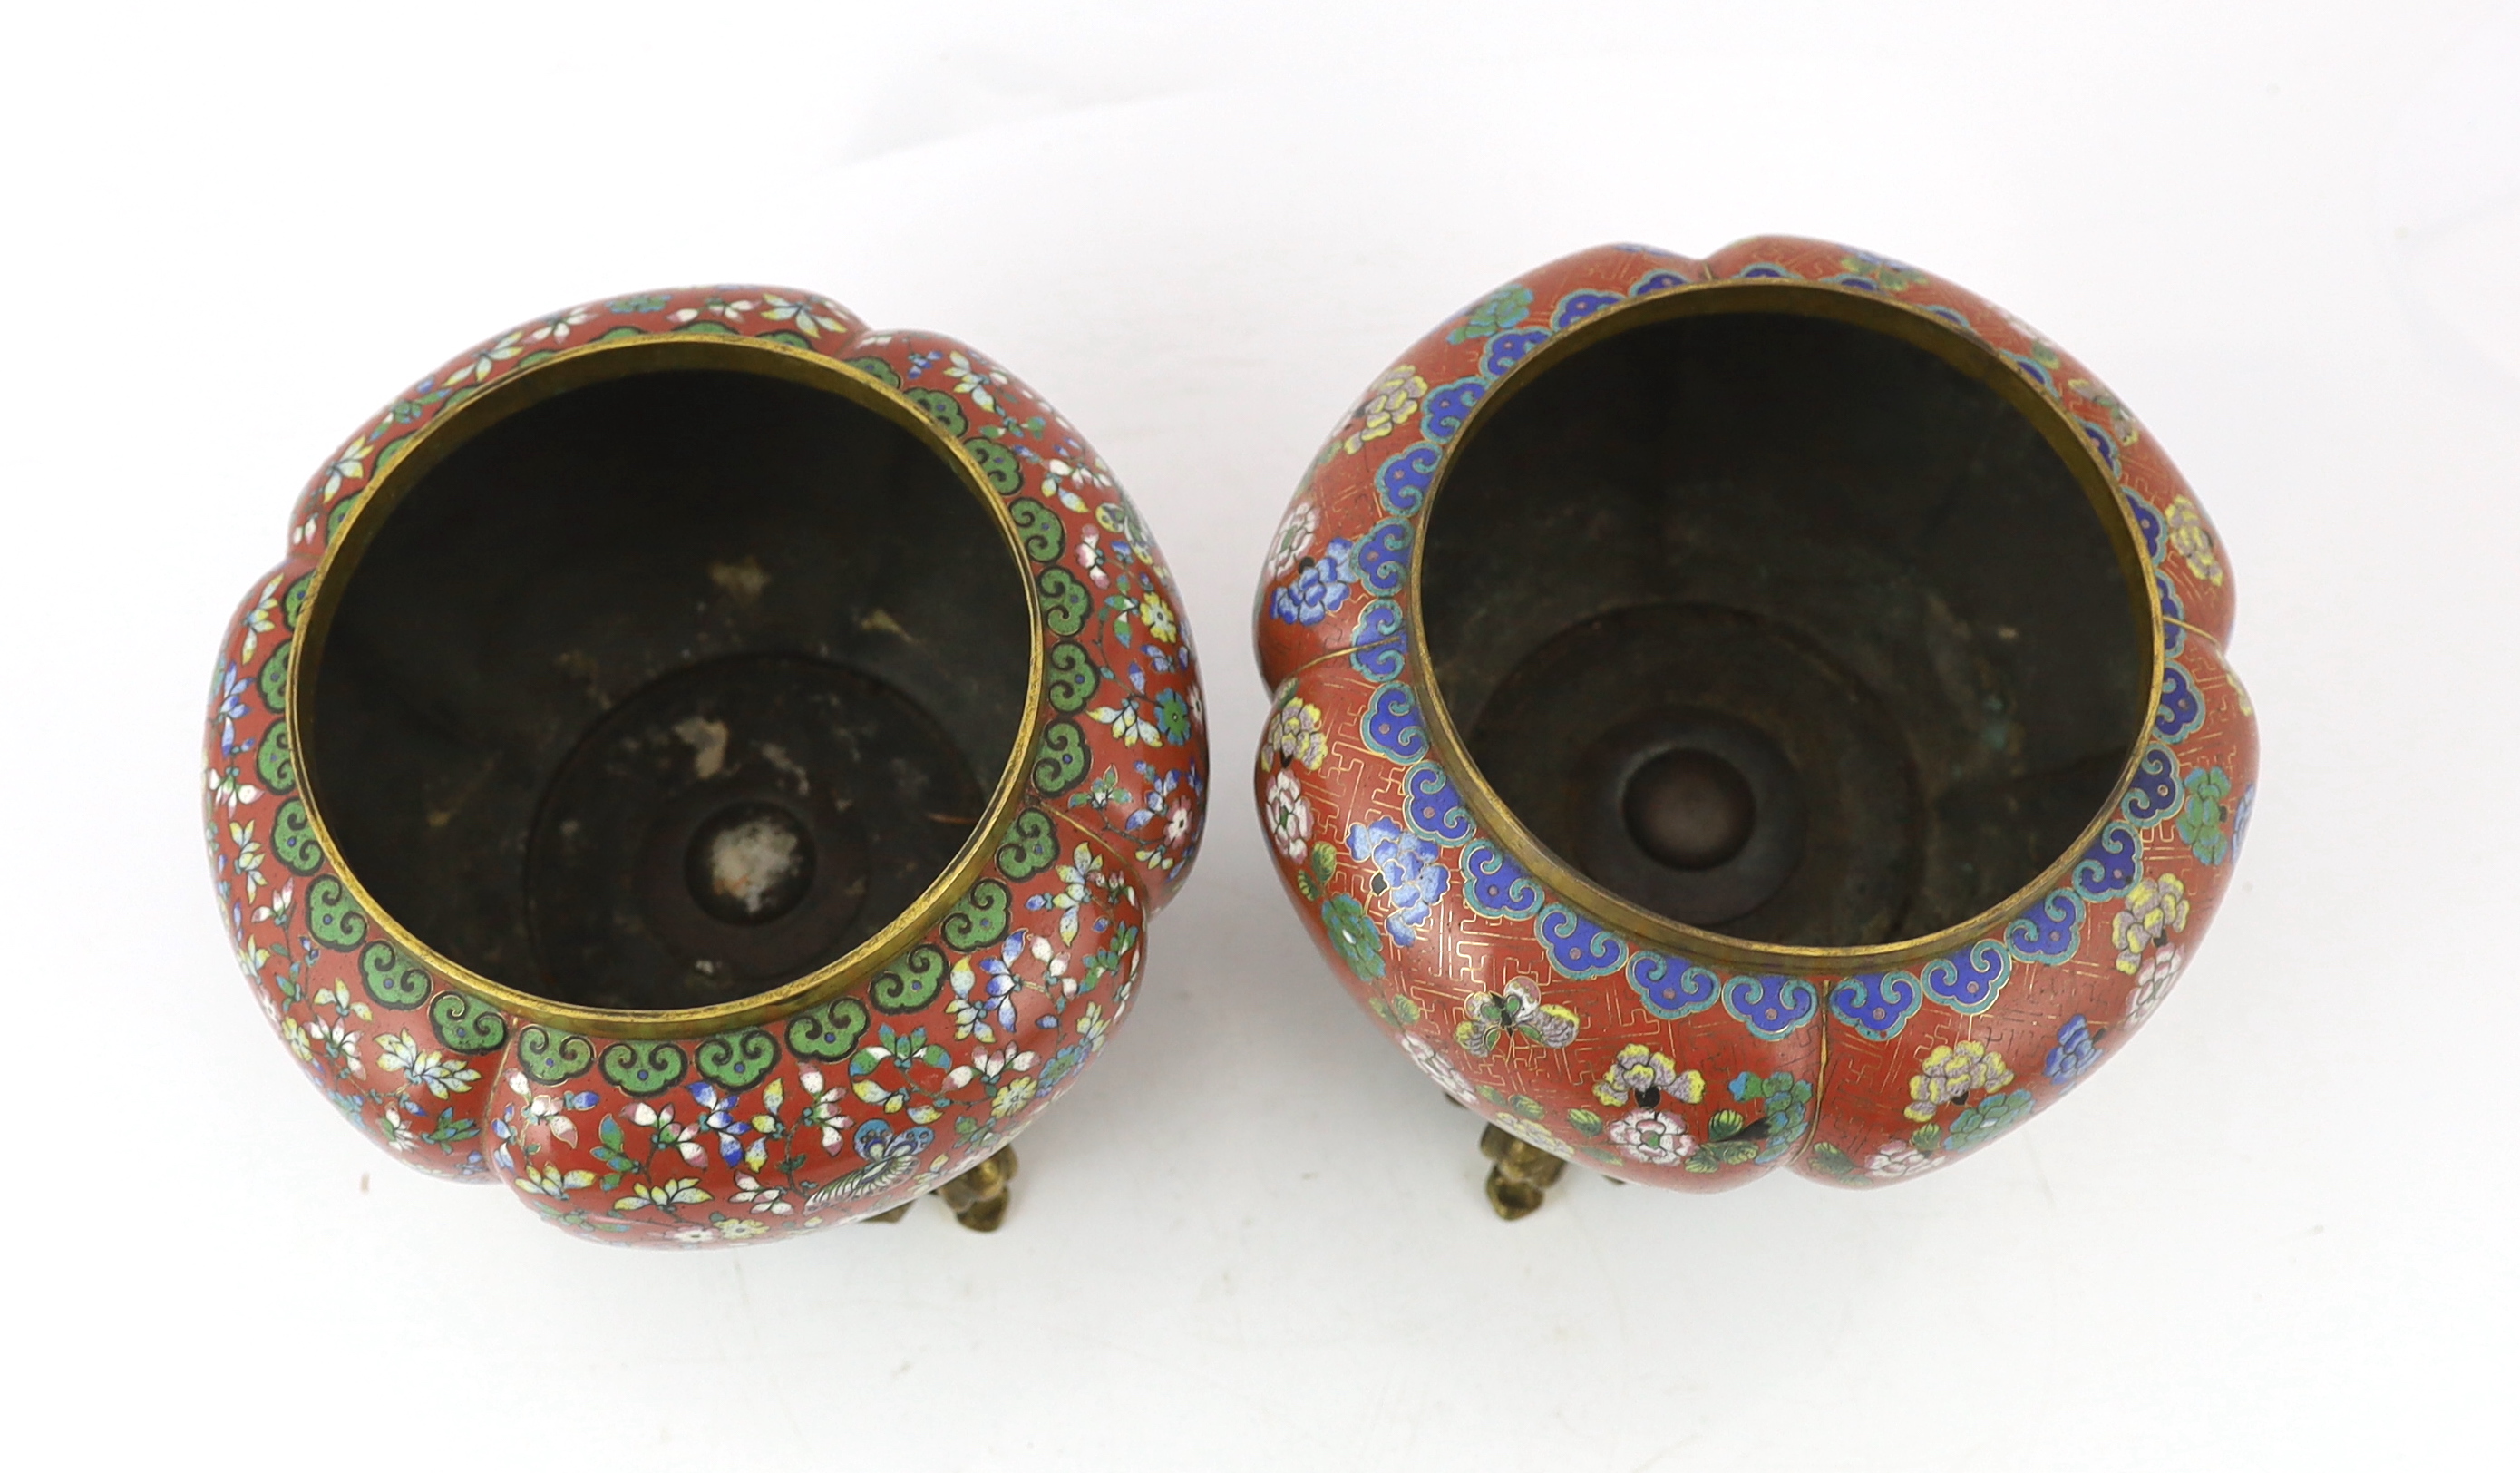 A near pair of Chinese cloisonné enamel and gilt bronze jardinieres, 19th century